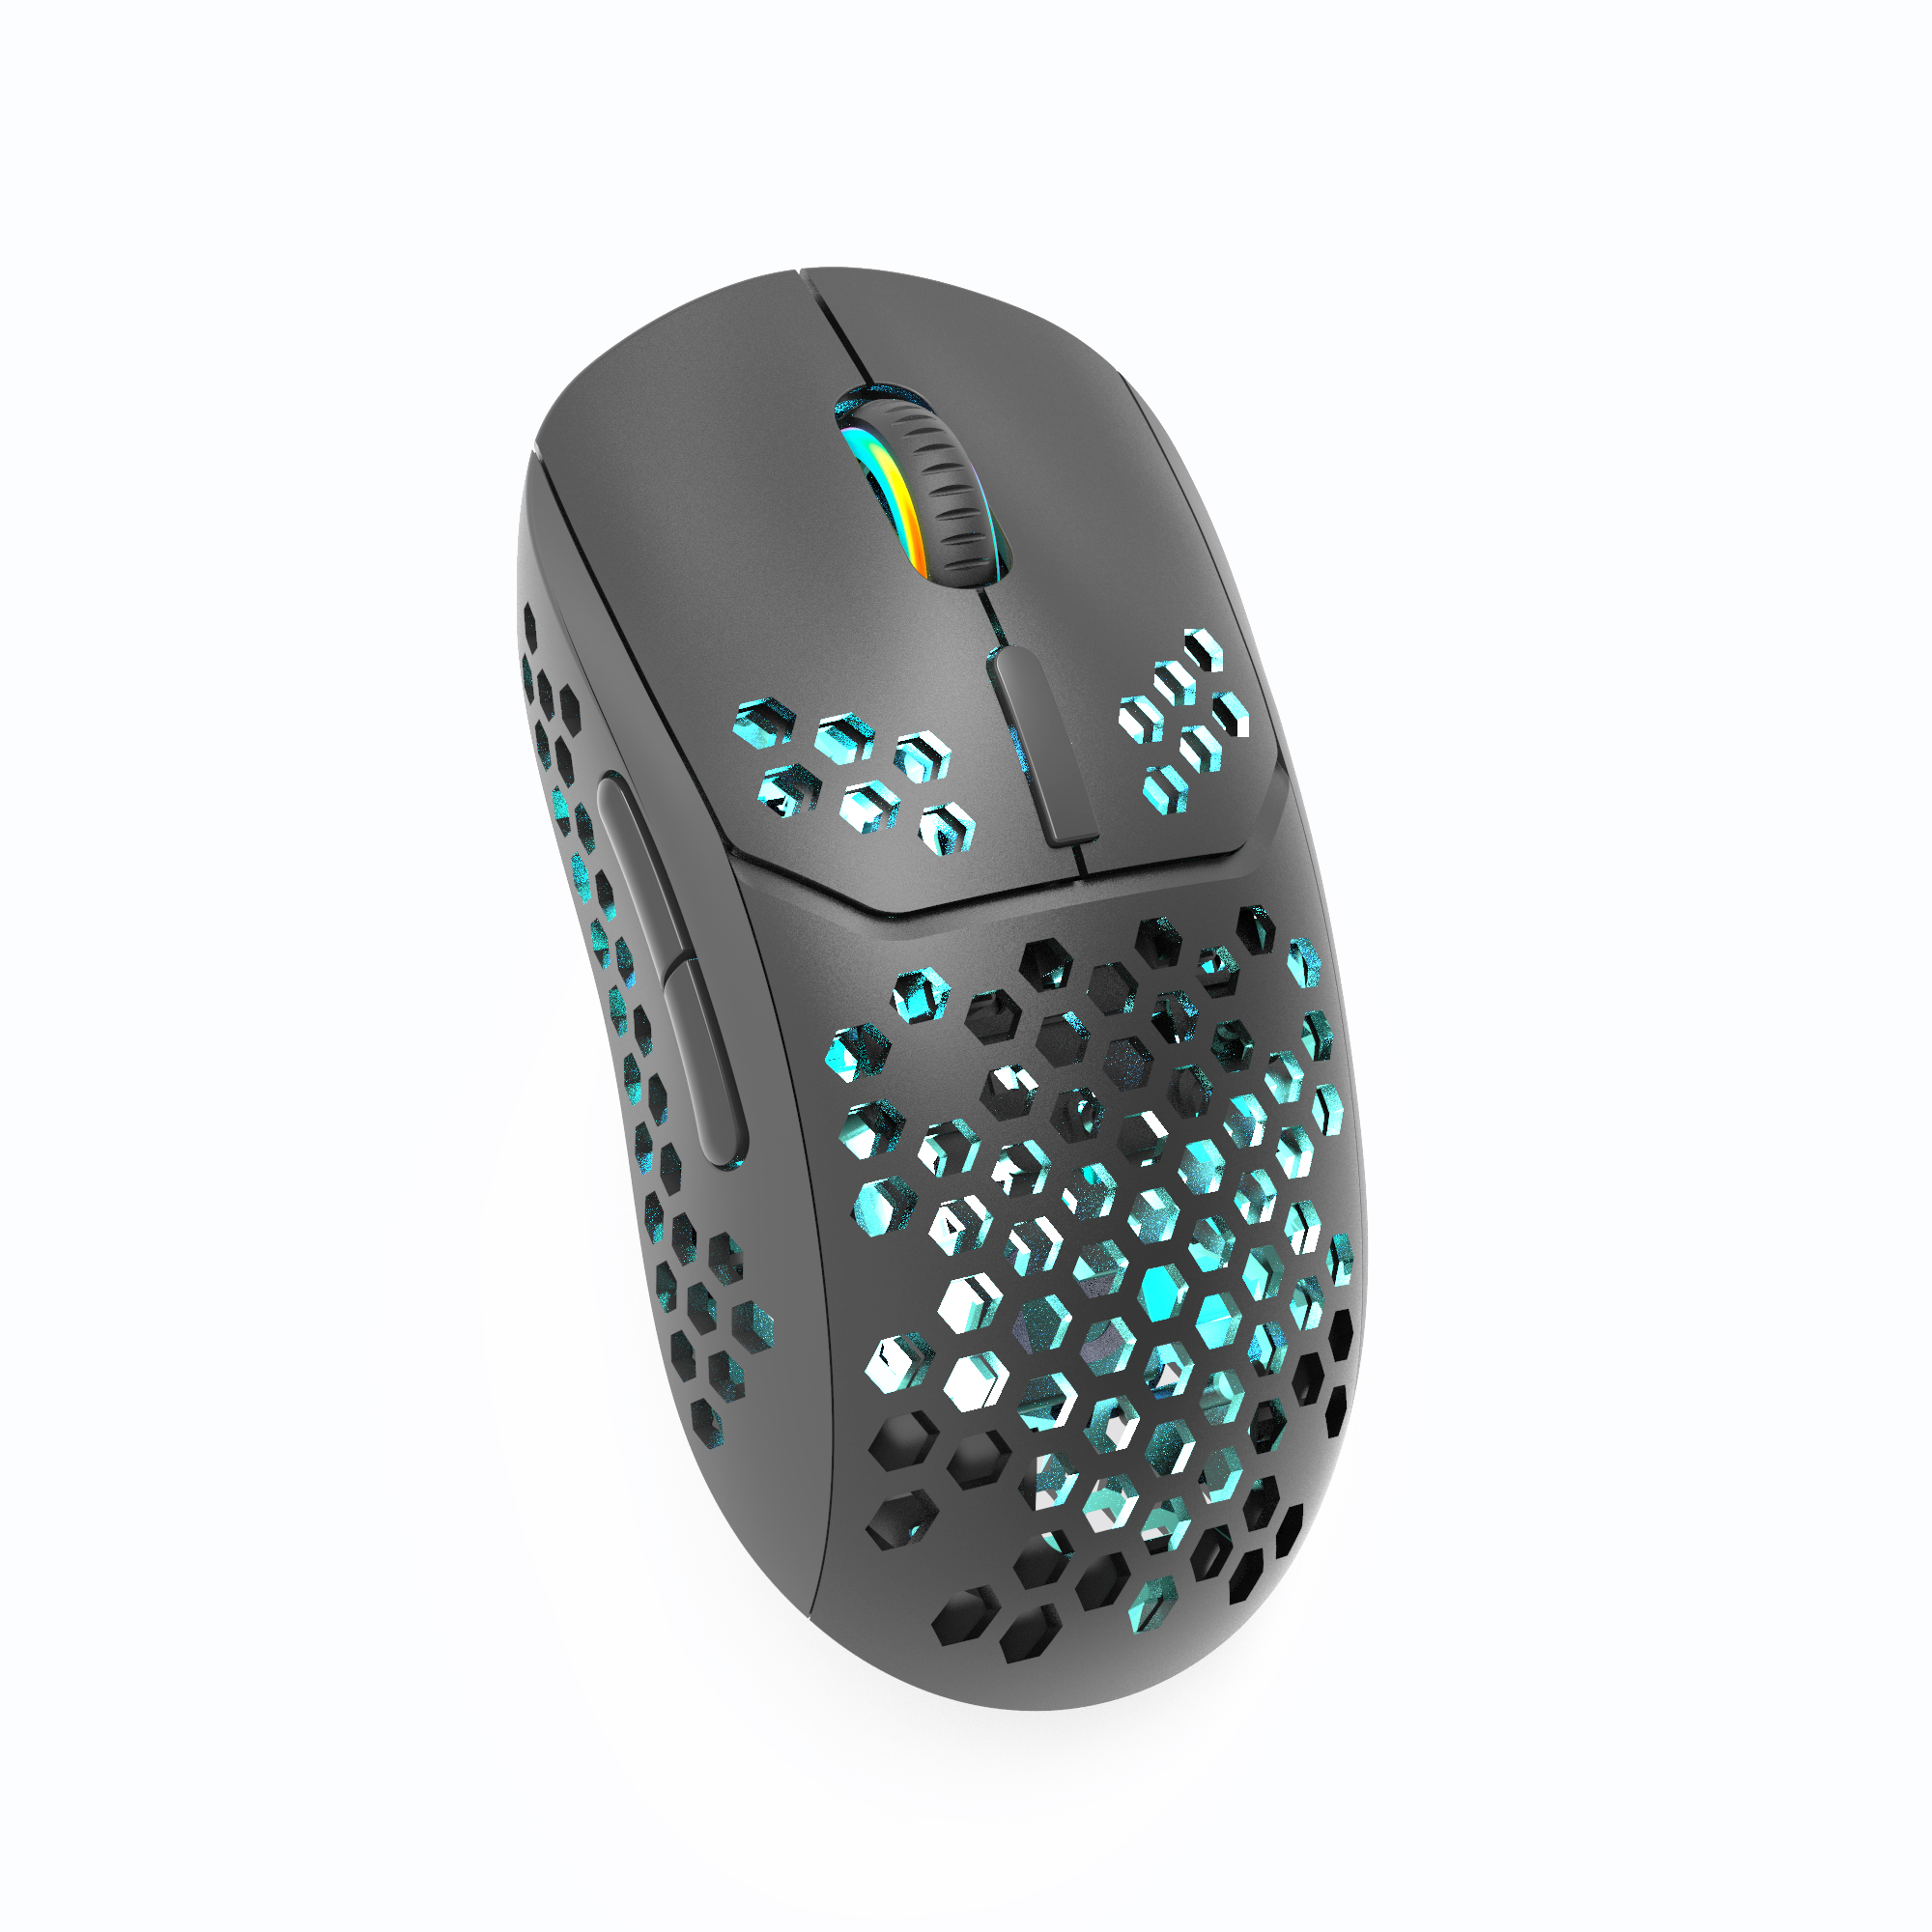 X8 BT Led Wireless Mouse,Muted,Ultra Lightweight,Honeycomb Shell,Bluetooth,USB Receiver Rechargeable